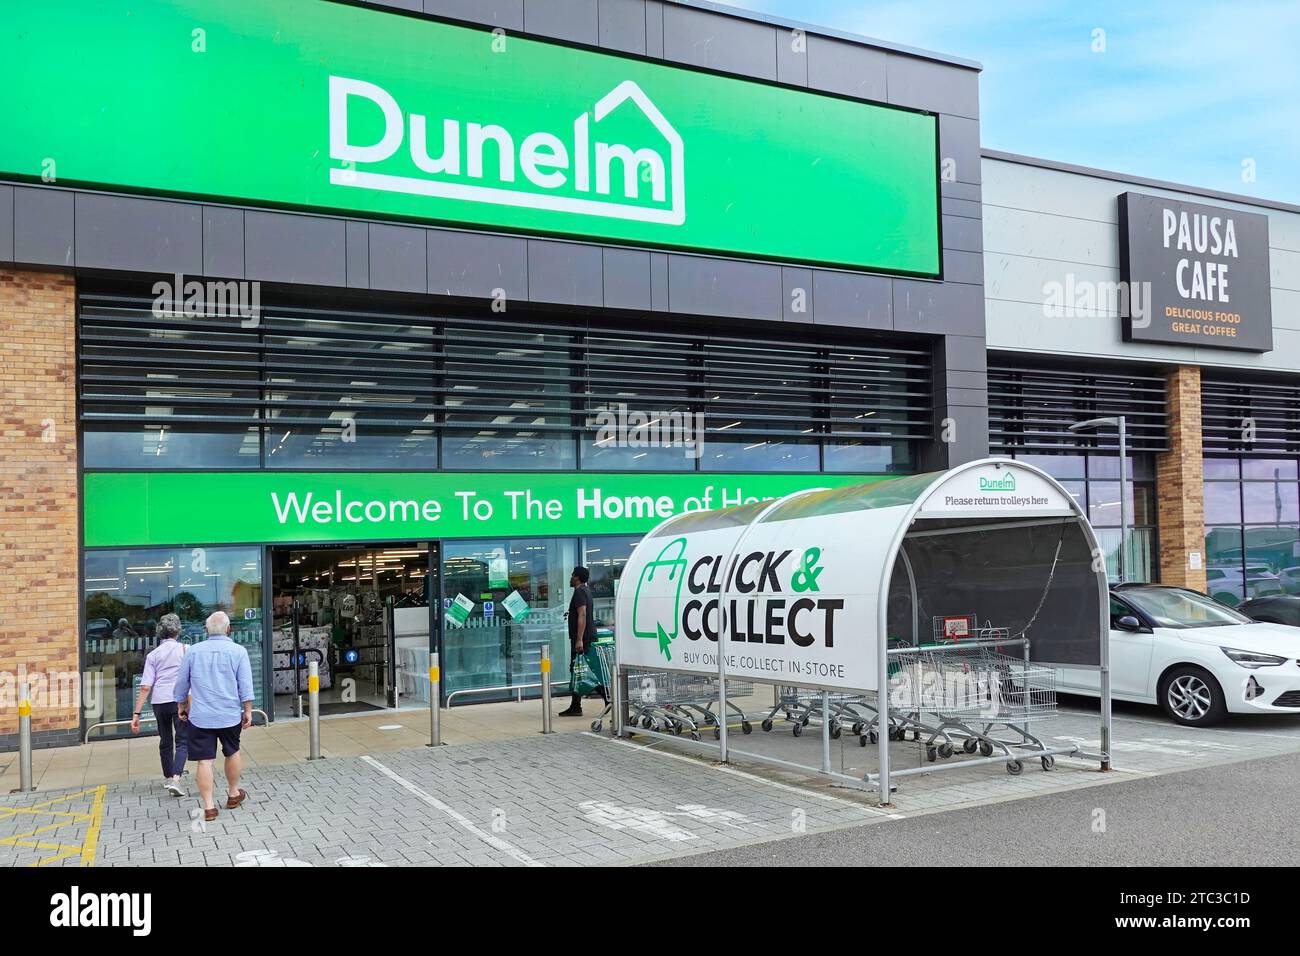 Click & collect sign on shopping trolley shed Dunelm brand welcome store logo home of a Soft furnishing business customers entering Essex England UK Stock Photo